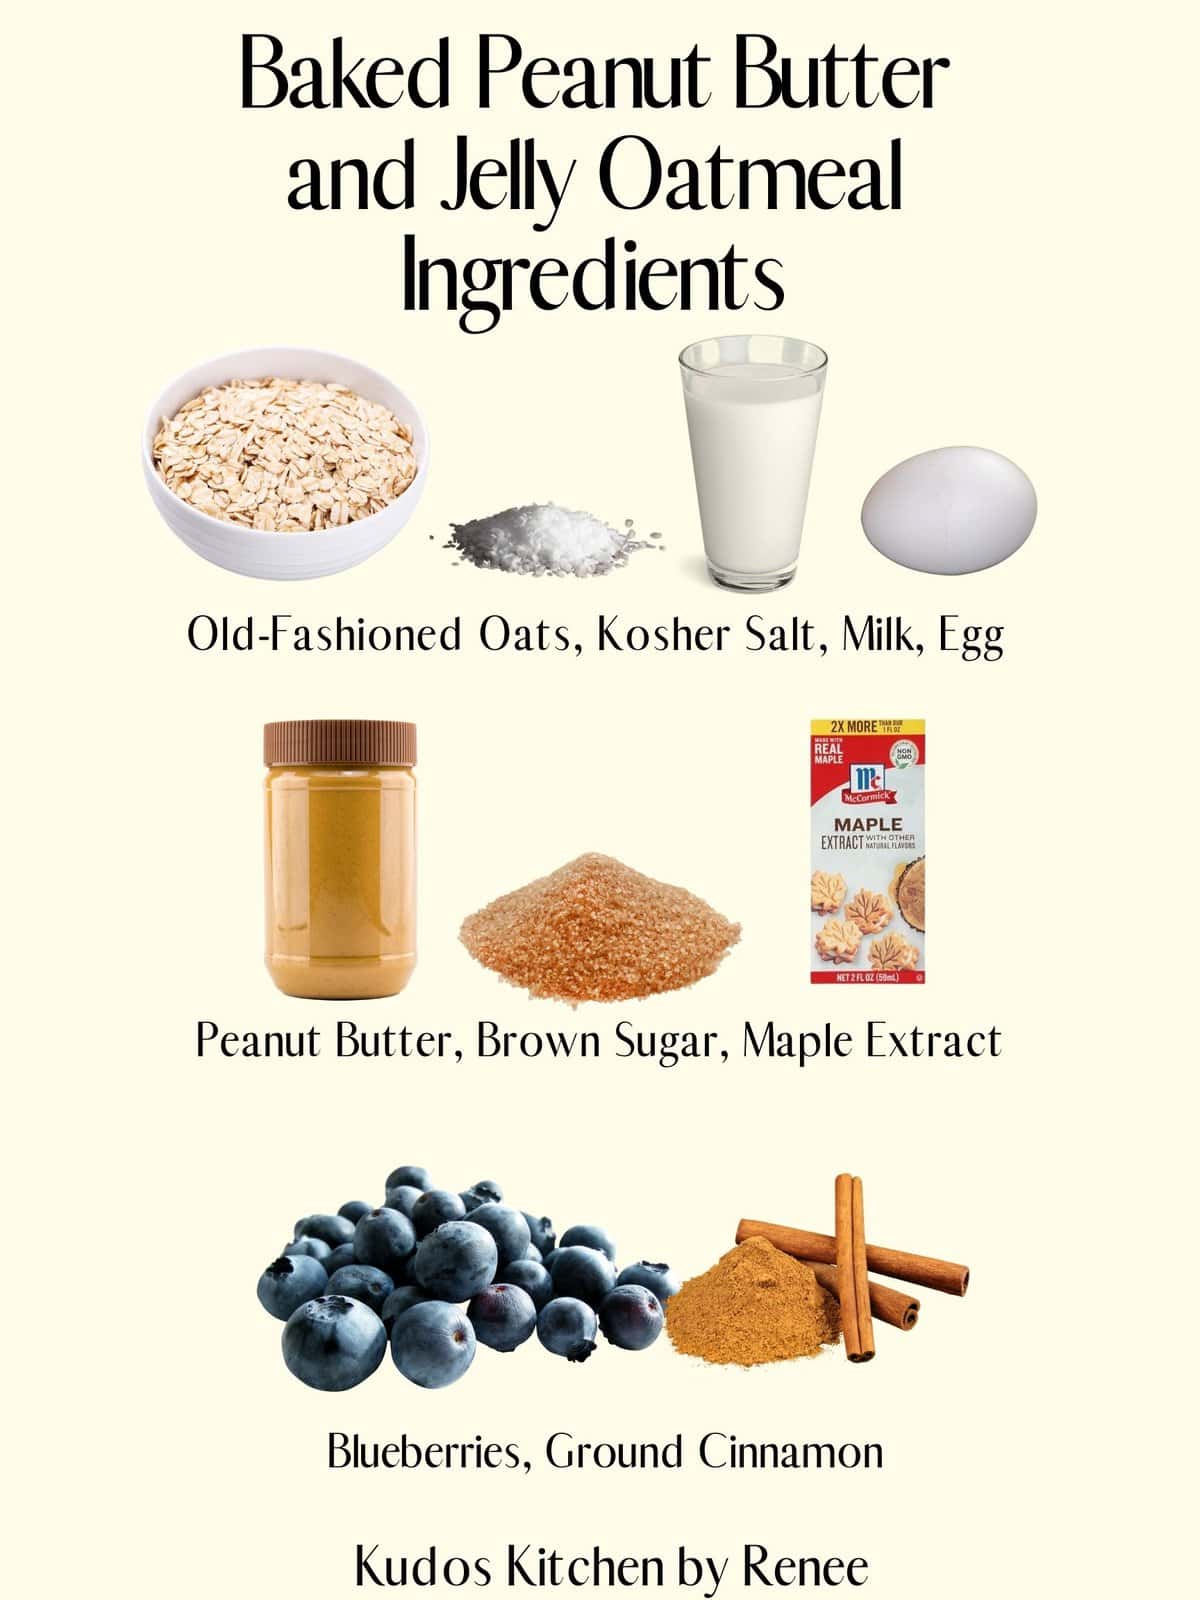 A visual ingredient list for making Baked Peanut Butter and Jelly Oatmeal.